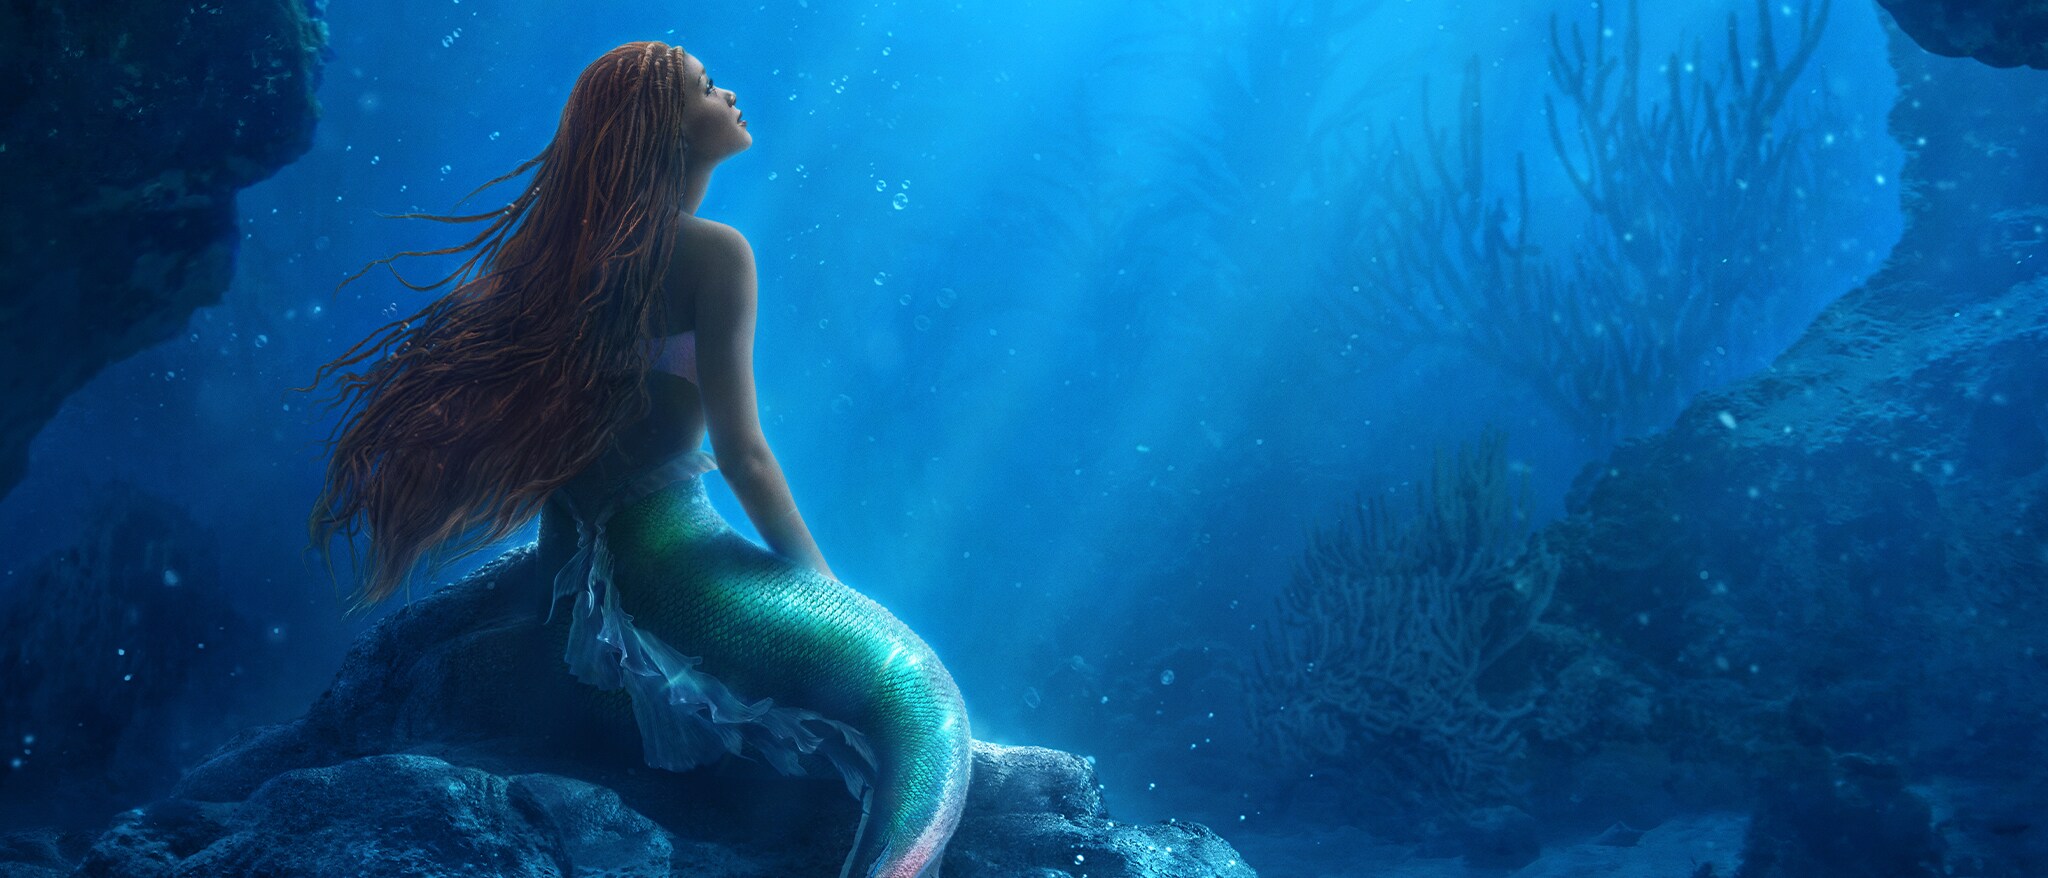 The Little Mermaid - Featured Content Banner